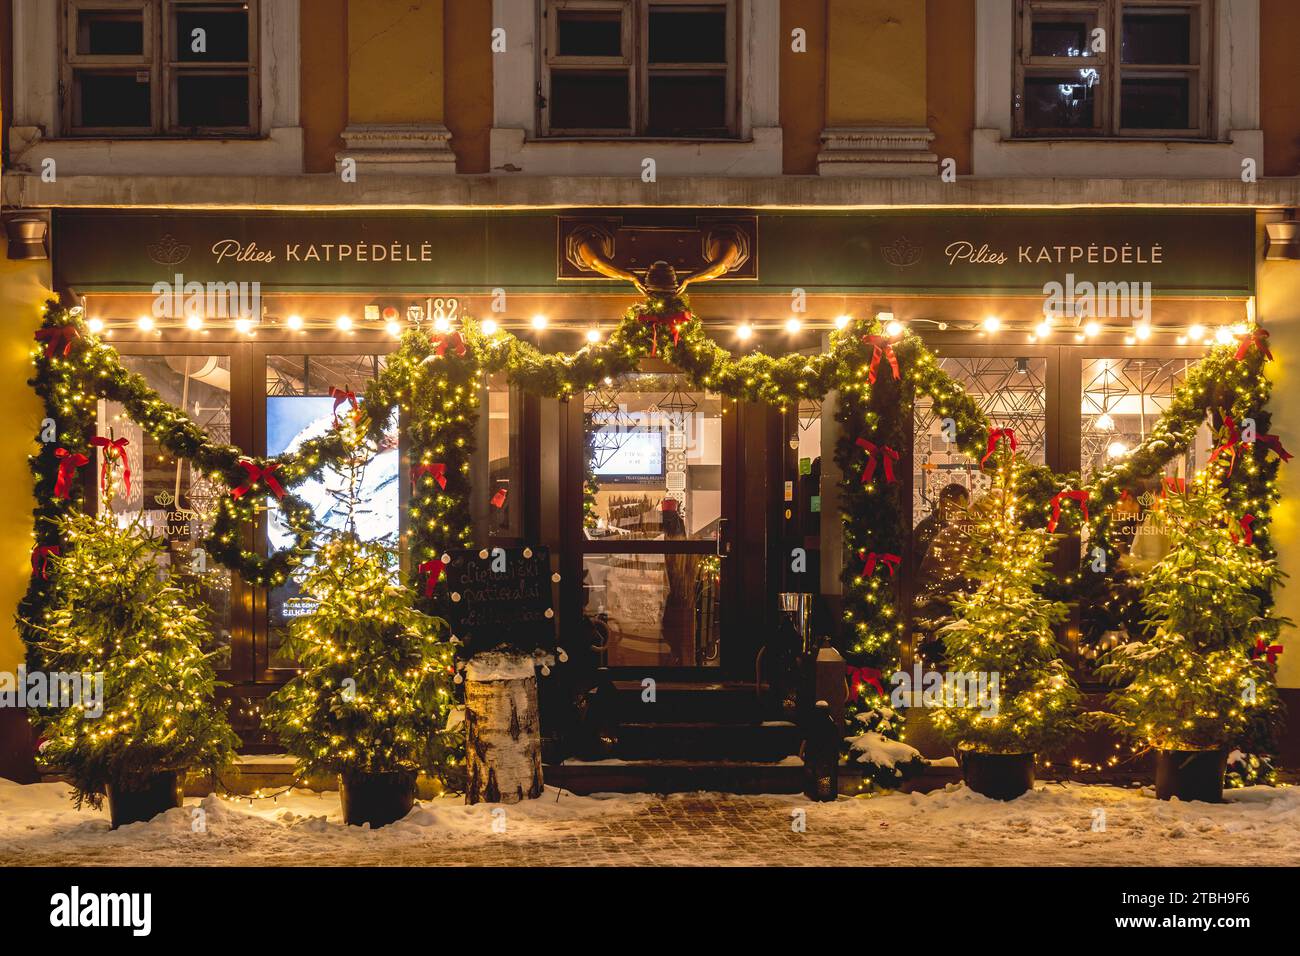 Beautiful entrance and windows of a restaurant with cozy Christmas decorations, wreath, garlands and lights in Vilnius old town, capital of Lithuania Stock Photo